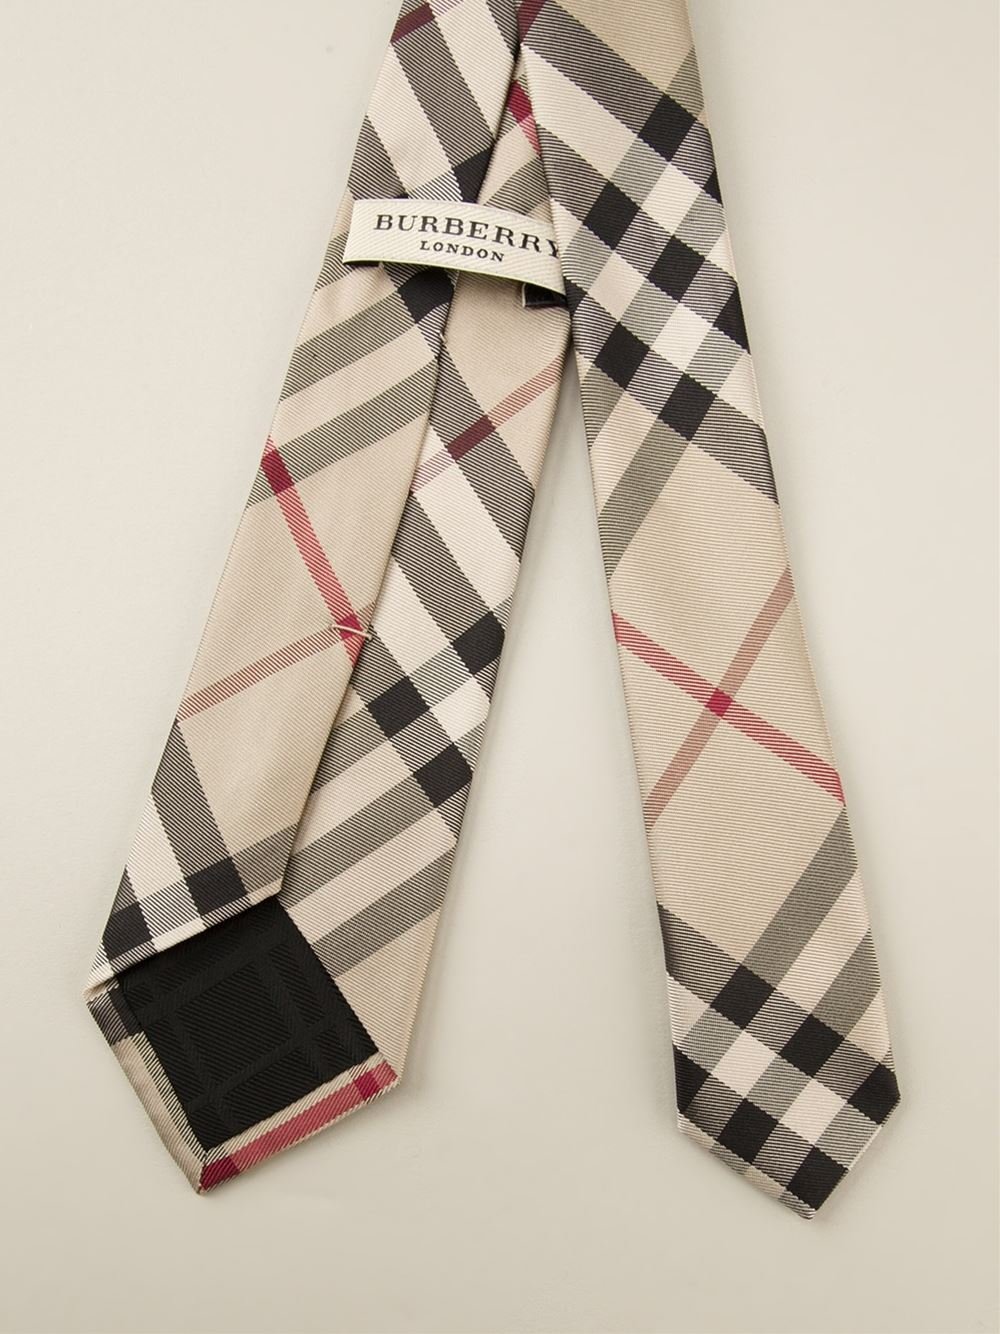 Burberry Check Tie in for Men -